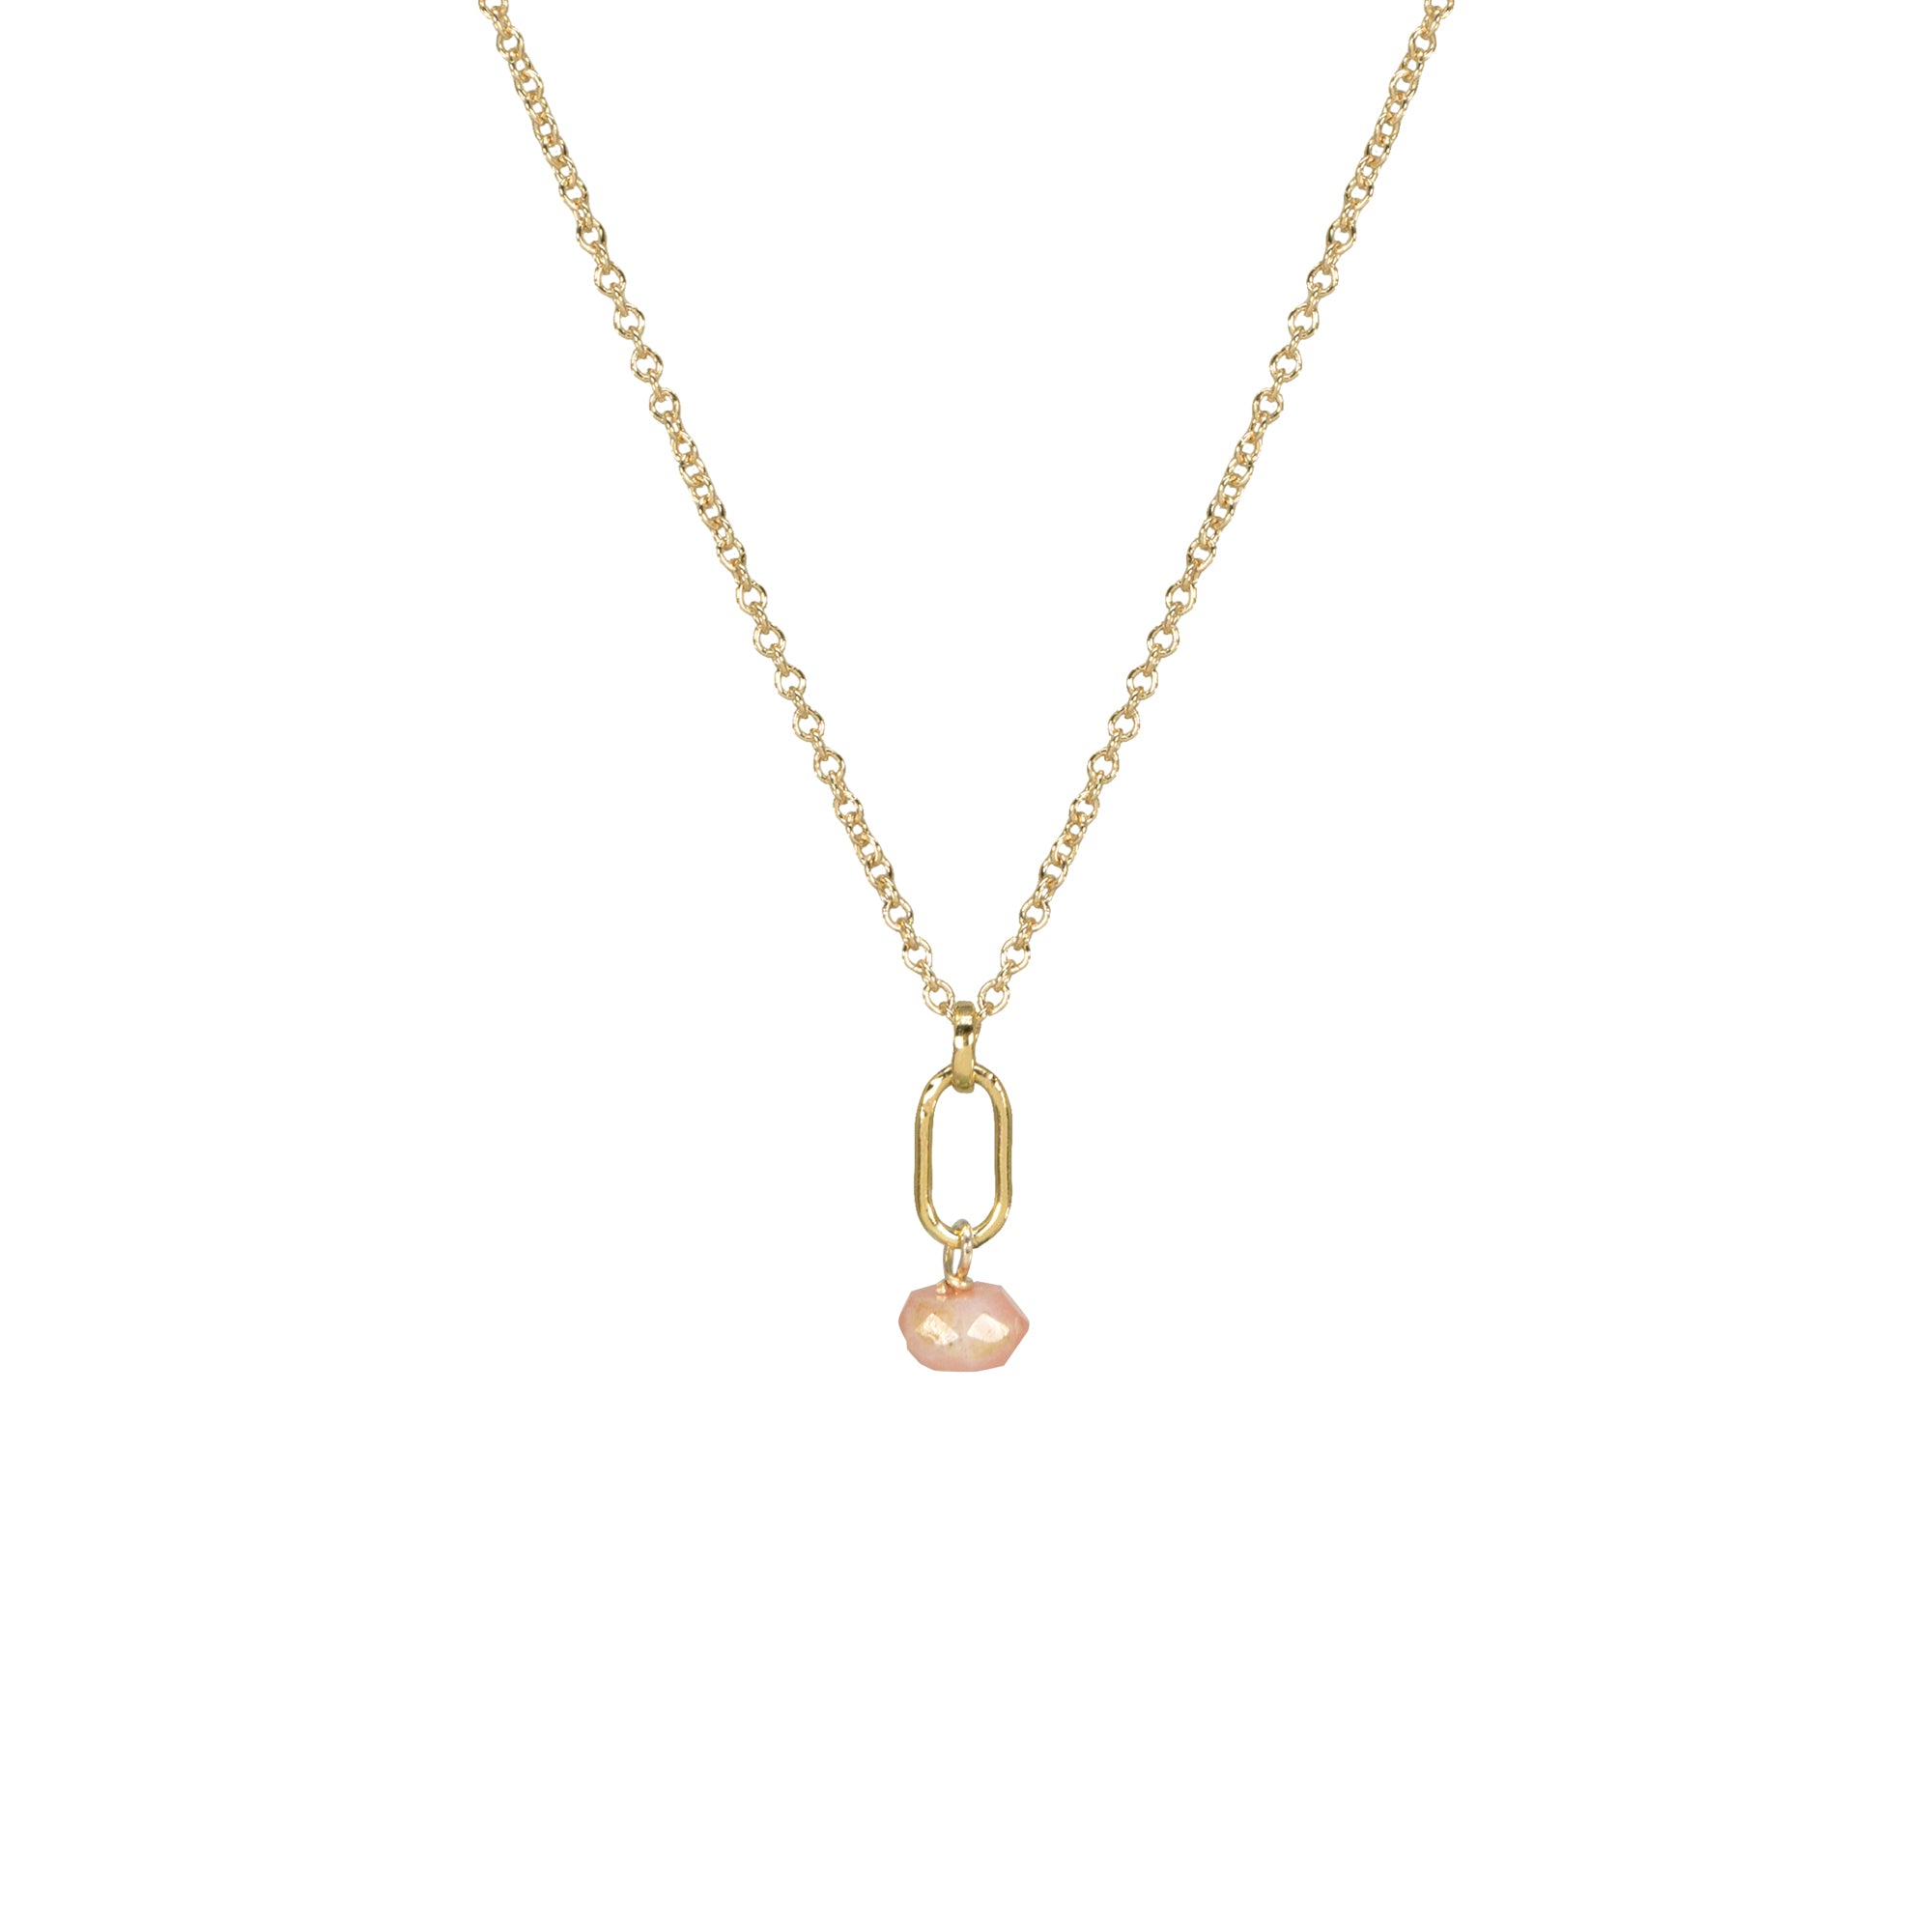 October birthstone pink opal necklace